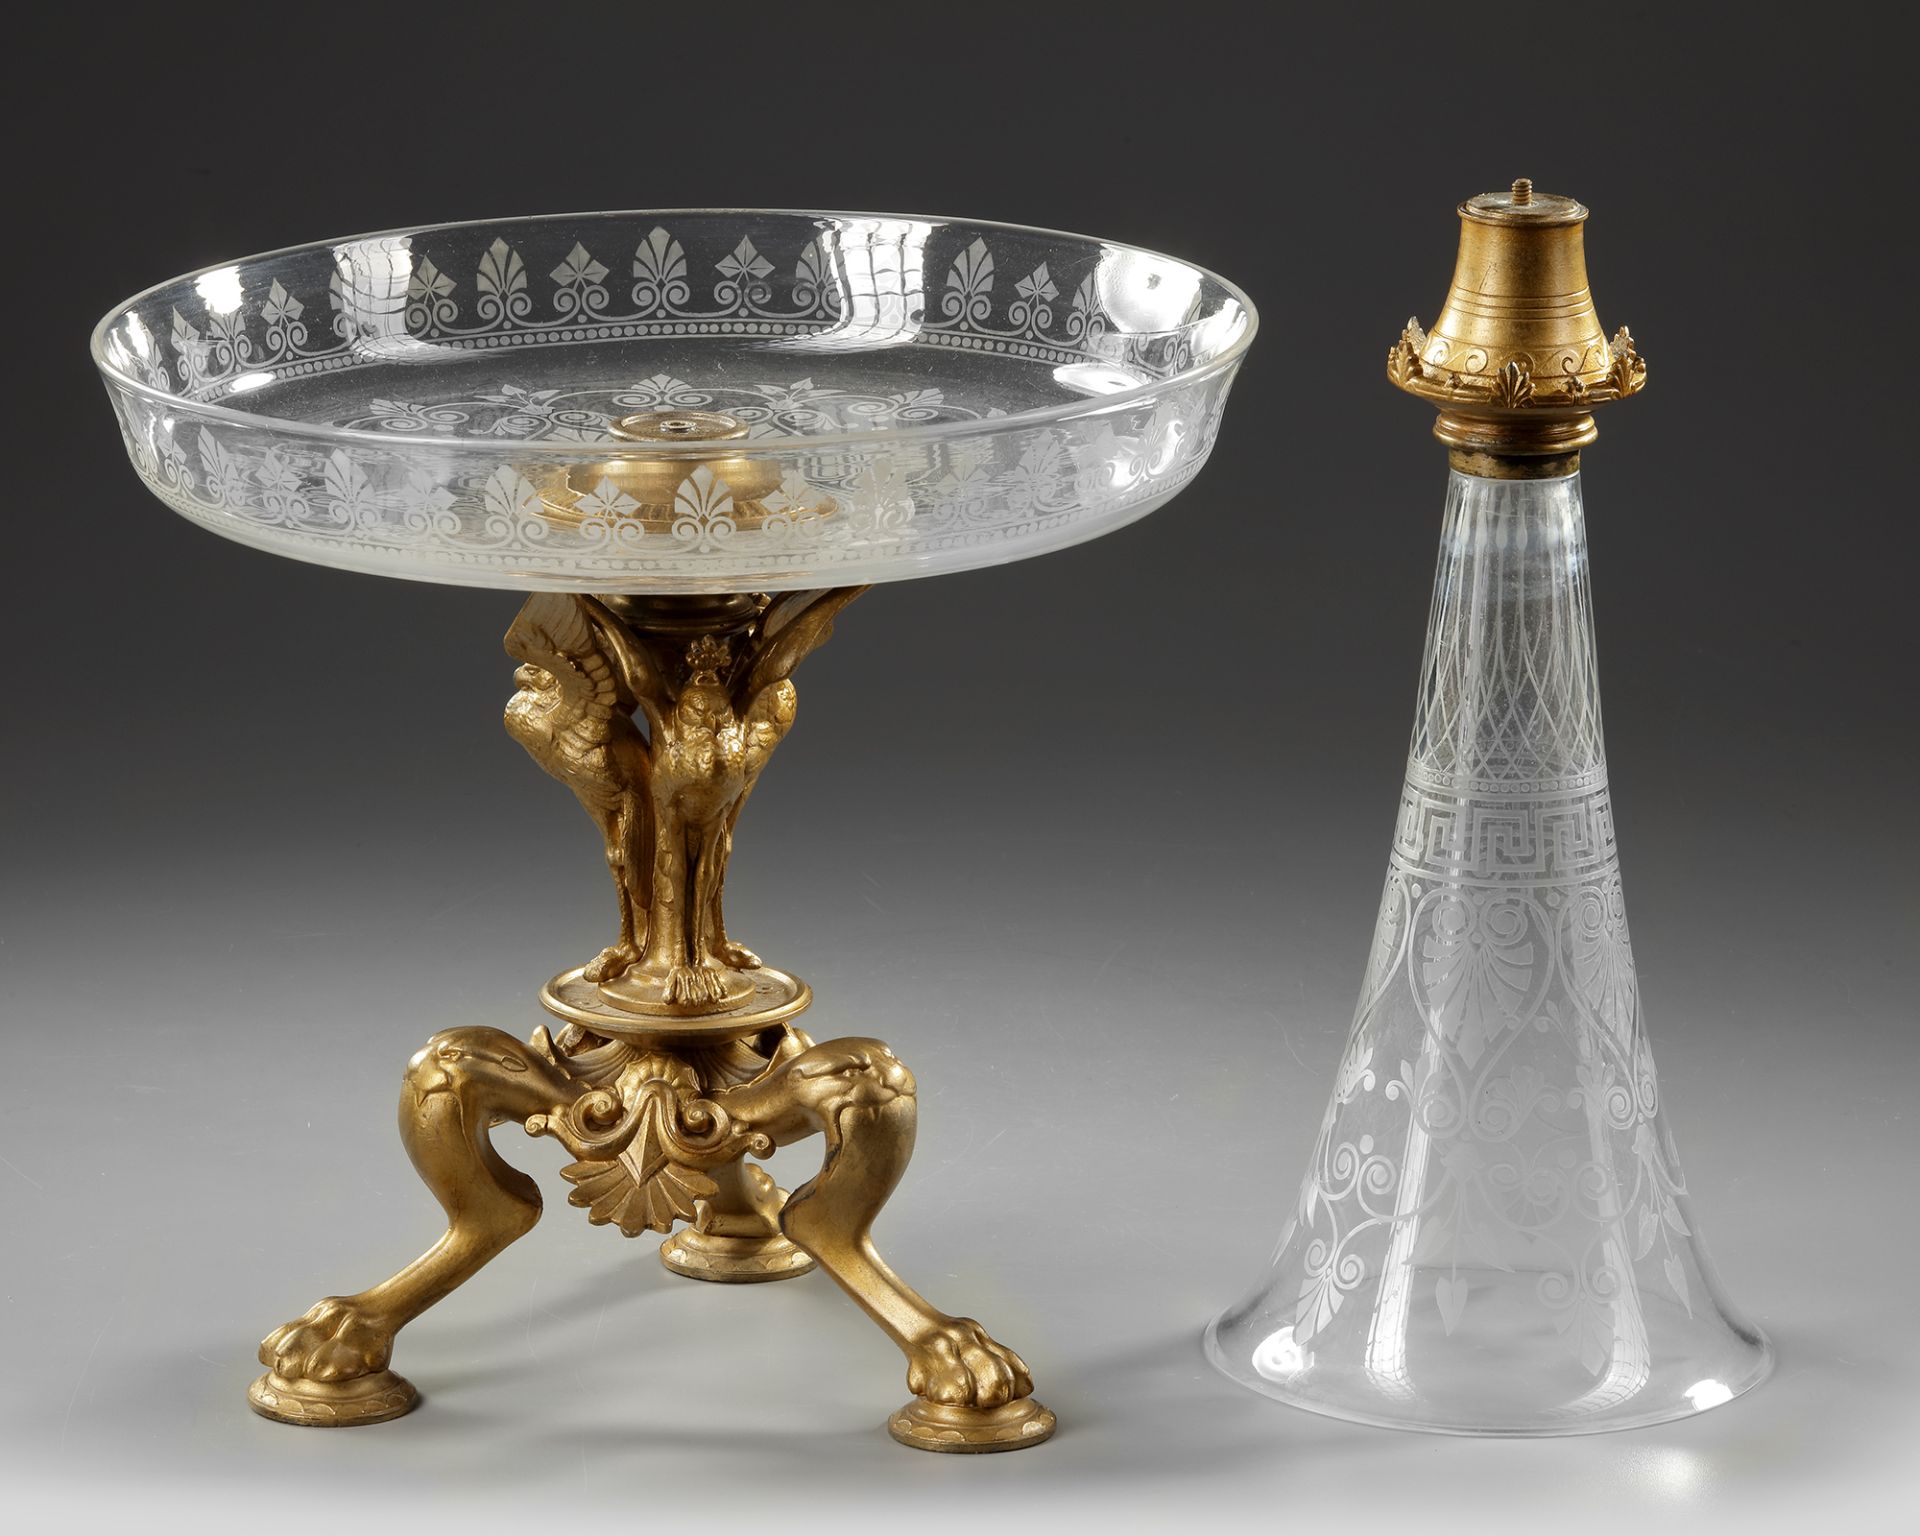 A CRYSTAL AND ORMOLU CENTER PIECE, FRANCE, LATE 19TH CENTURY - Image 3 of 3